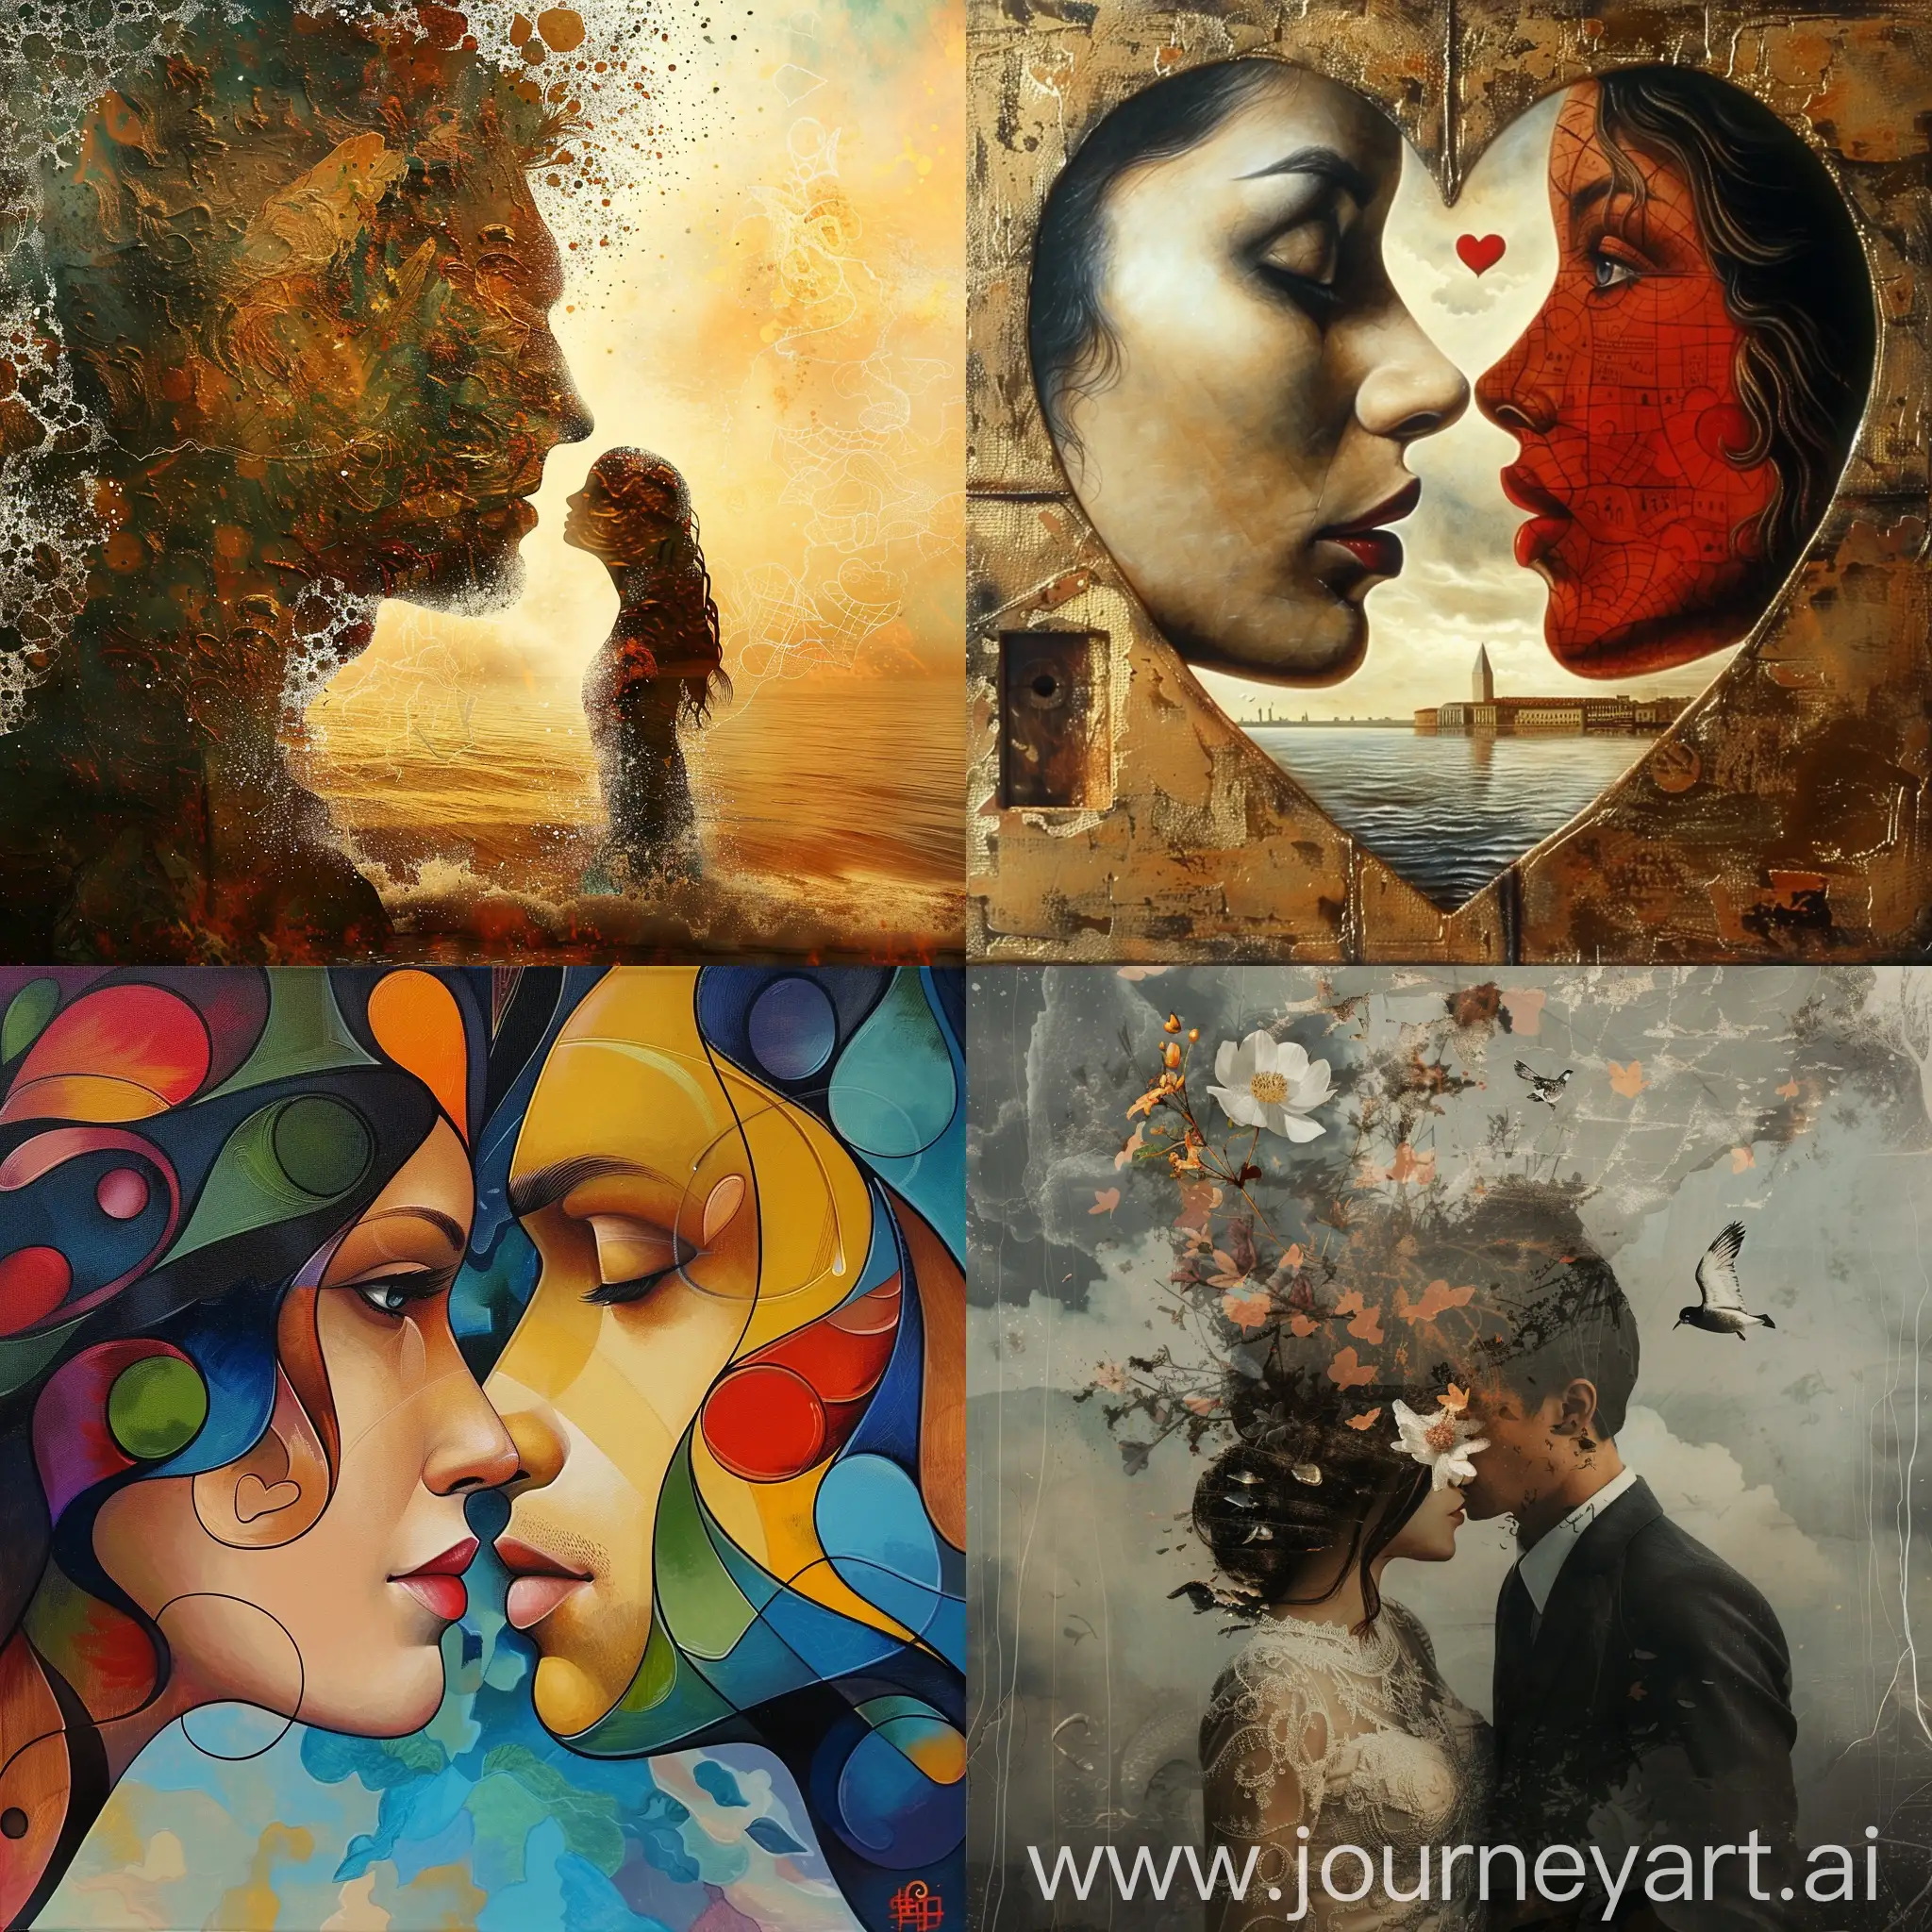 Picture in surrealism style with meaning behind it about love nowadays